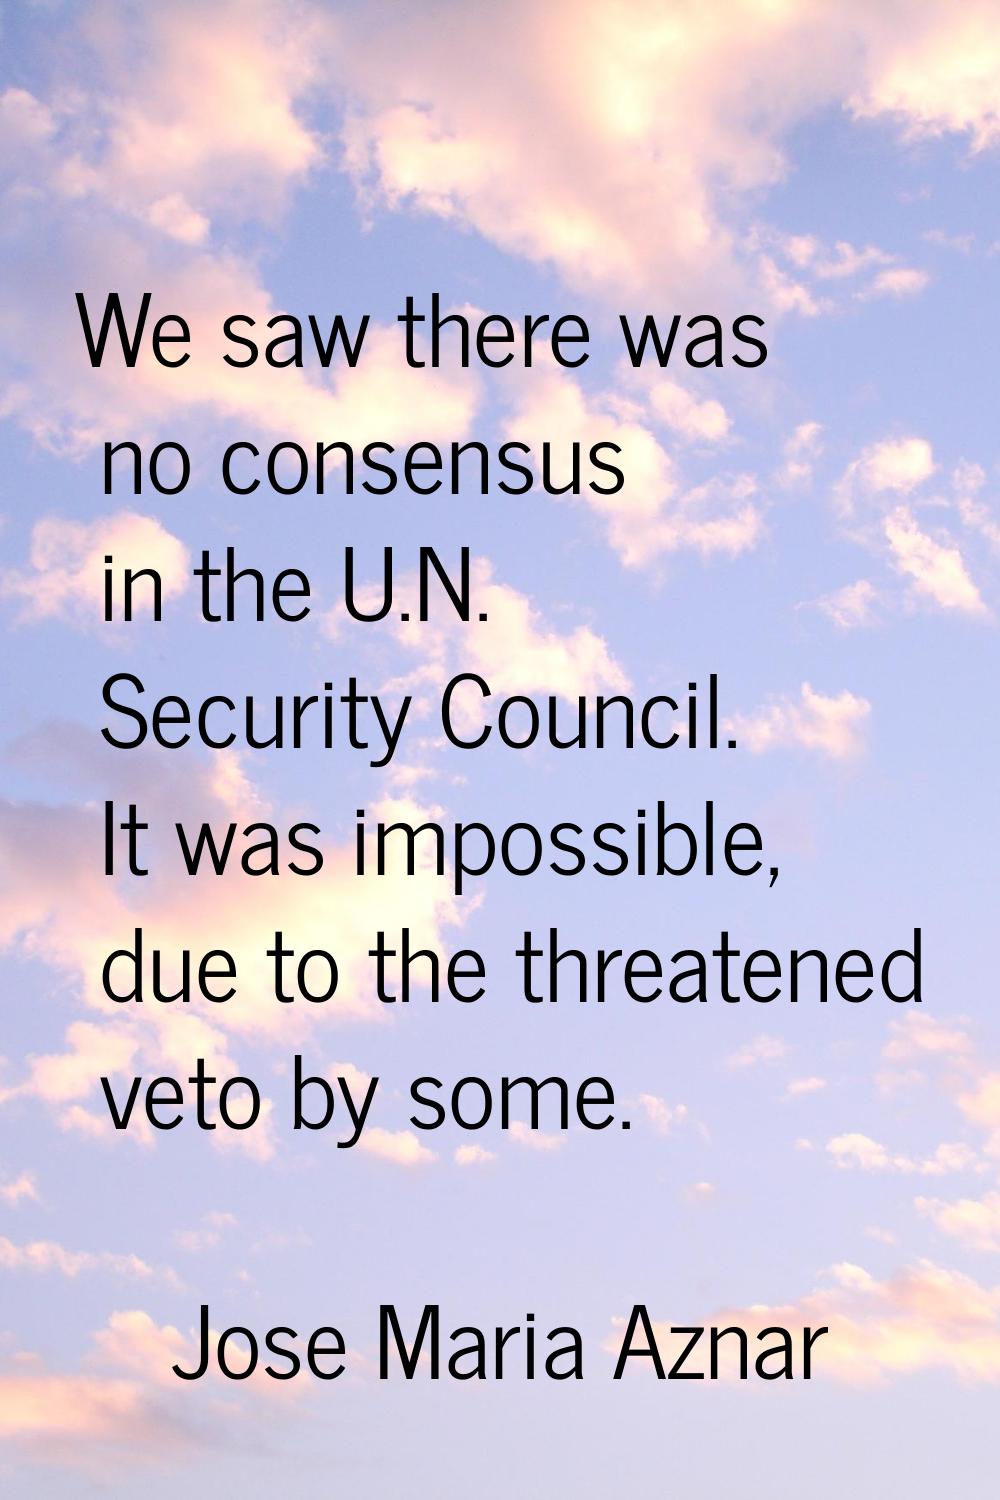 We saw there was no consensus in the U.N. Security Council. It was impossible, due to the threatene